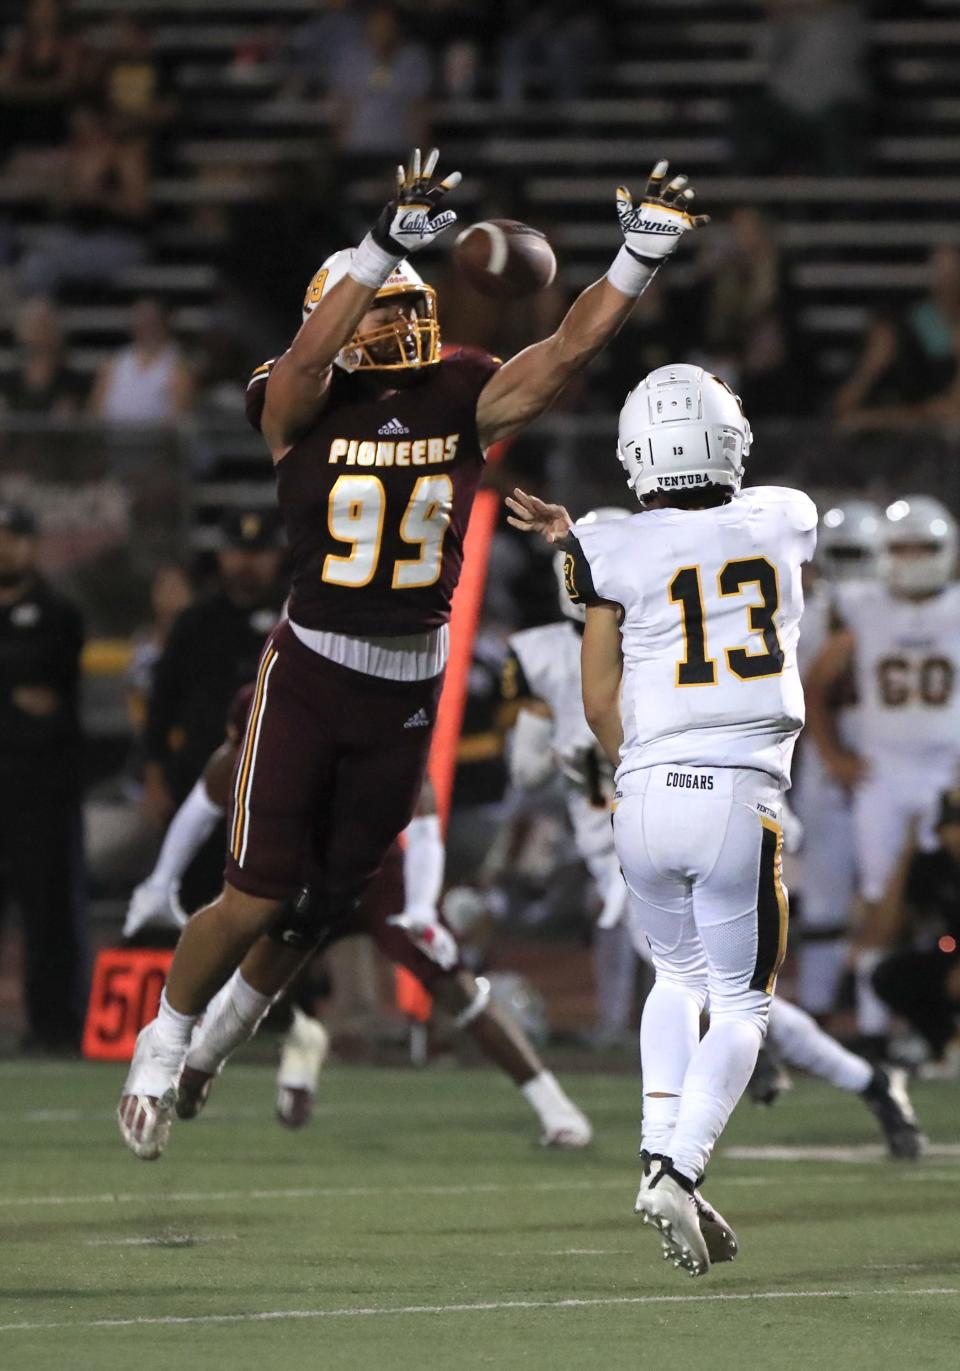 Simi Valley defensive end Carson Mott, shown knocking down a pass attempt against Ventura on Aug. 19, is ready for the challenge of playing in the Marmonte League.